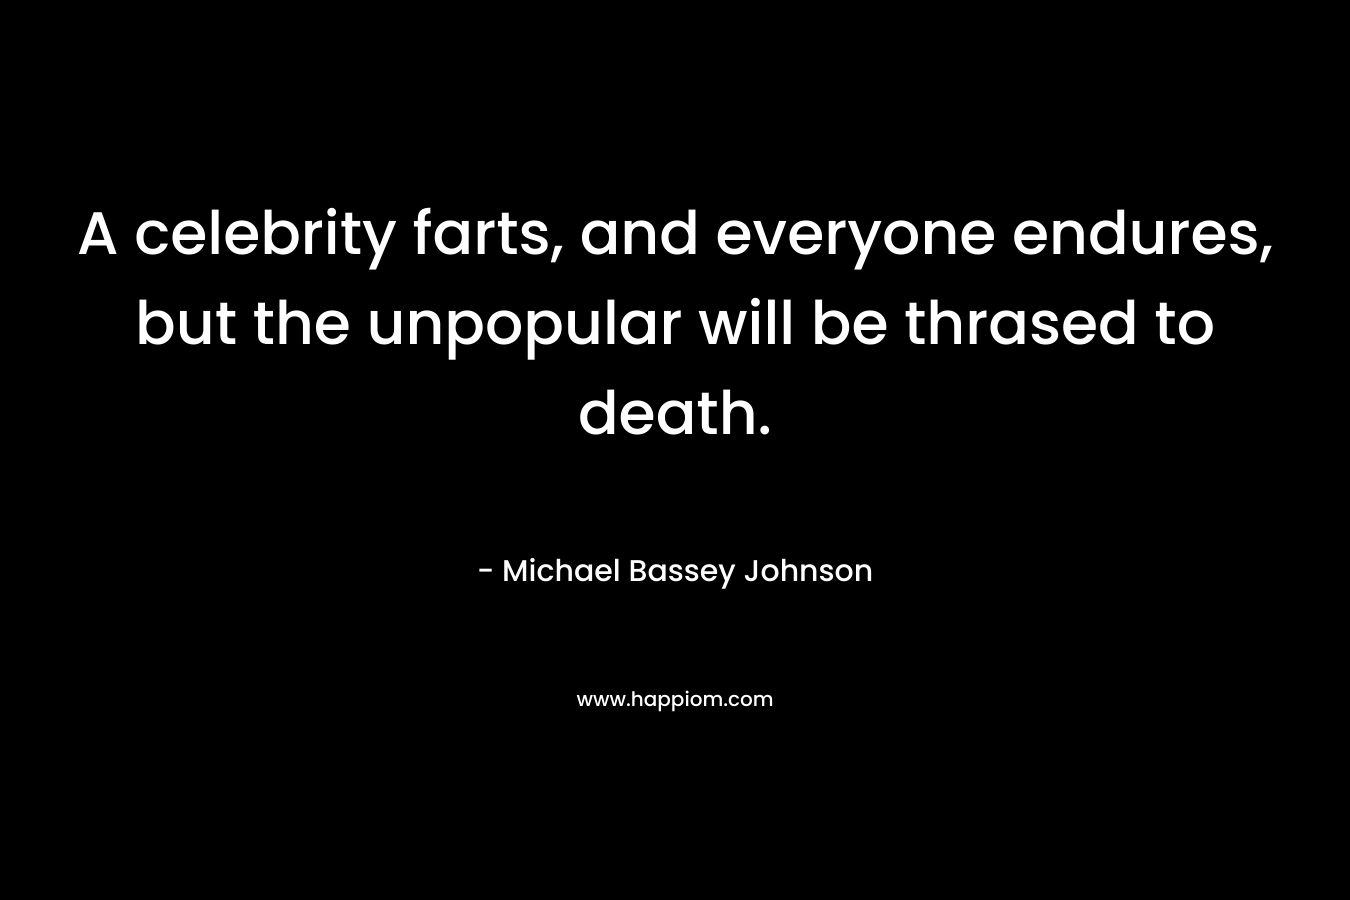 A celebrity farts, and everyone endures, but the unpopular will be thrased to death. – Michael Bassey Johnson